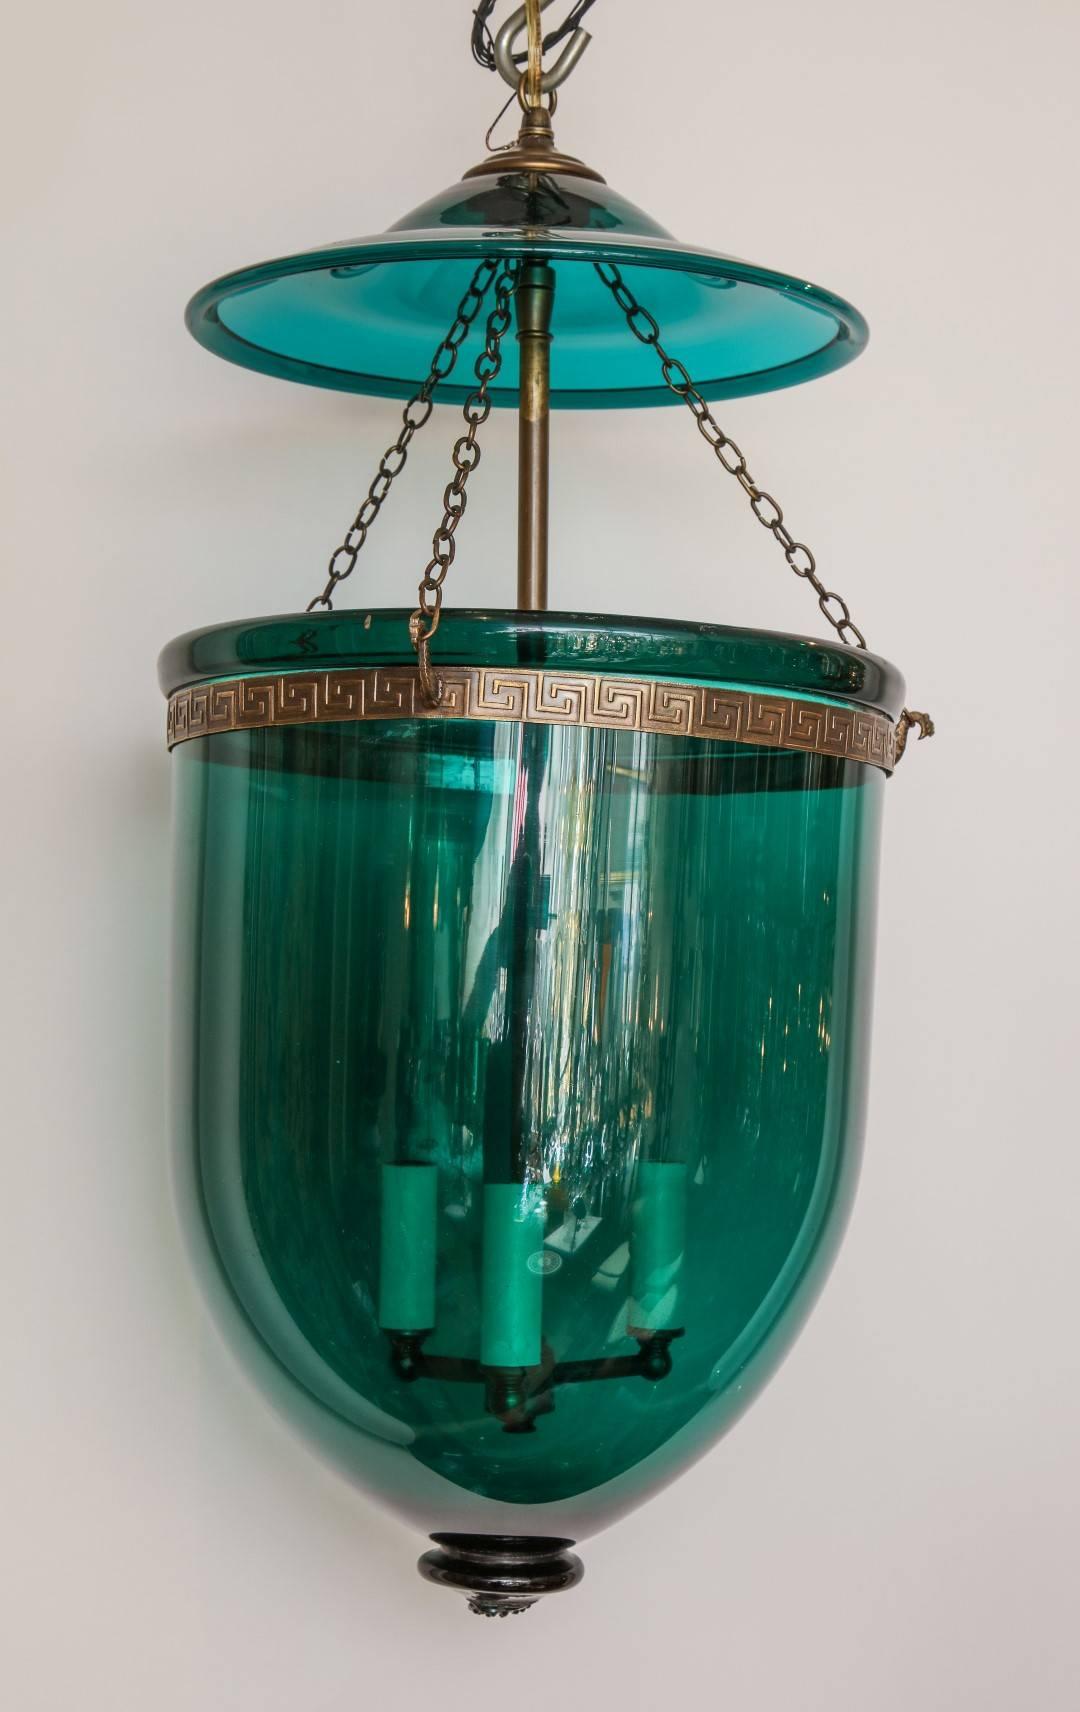 An English green hanging glass lantern, suspending a tripartite candelabrum with etched Greek key motif at collar, original smoke bell and brass fittings. New, standard wiring. Includes ceiling canopy and chain with matching antique brass